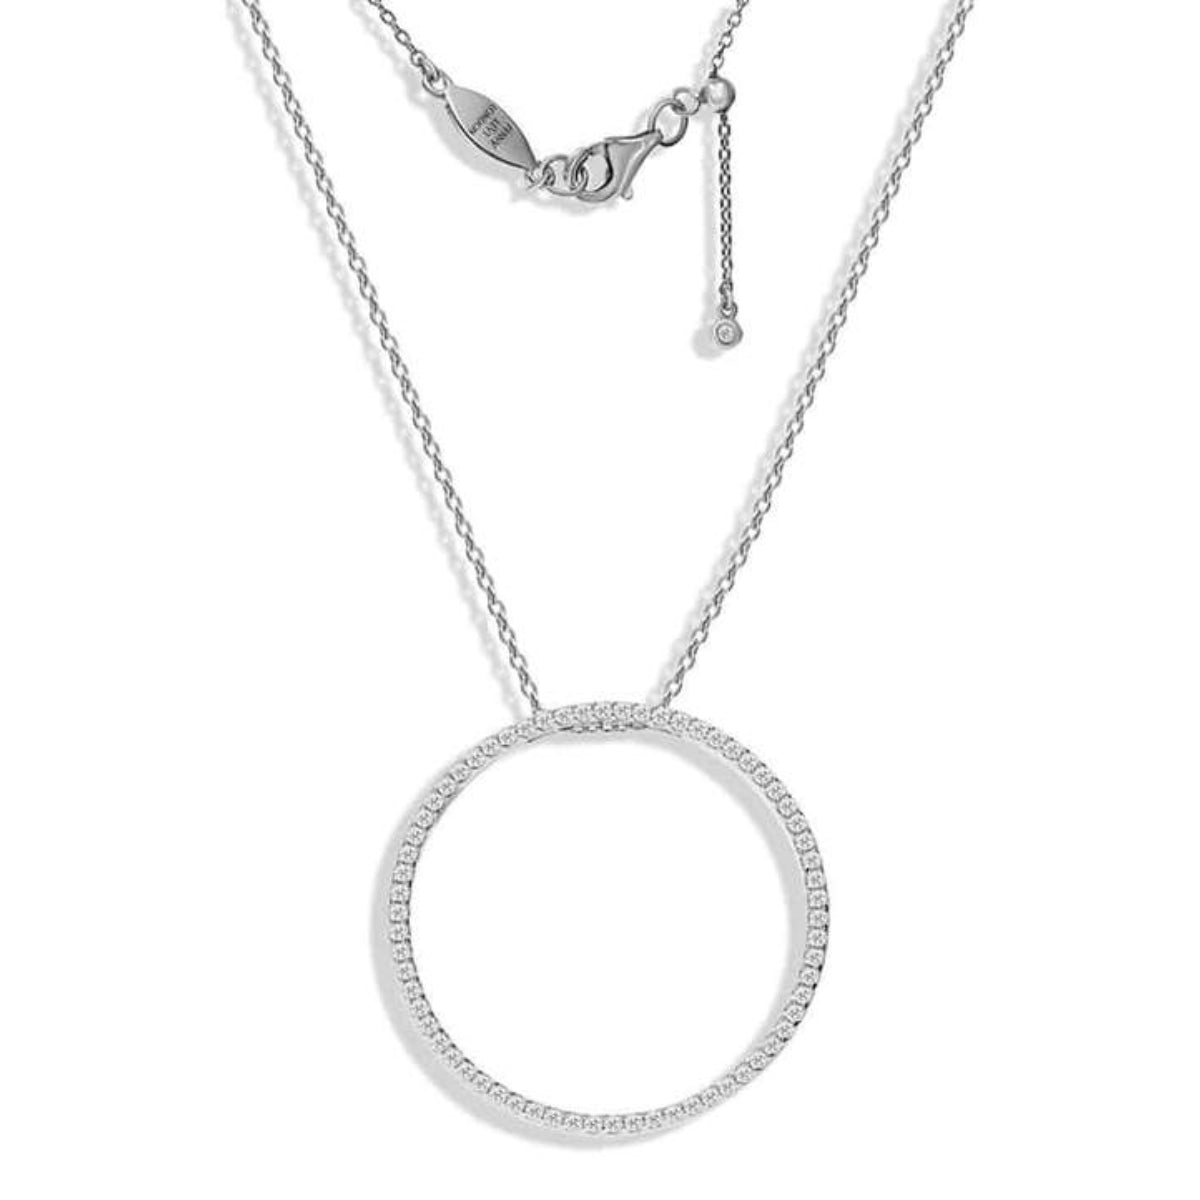 Silver Kingsbury Necklace with Cubic Zirconia (Large) - Lulu B Jewellery